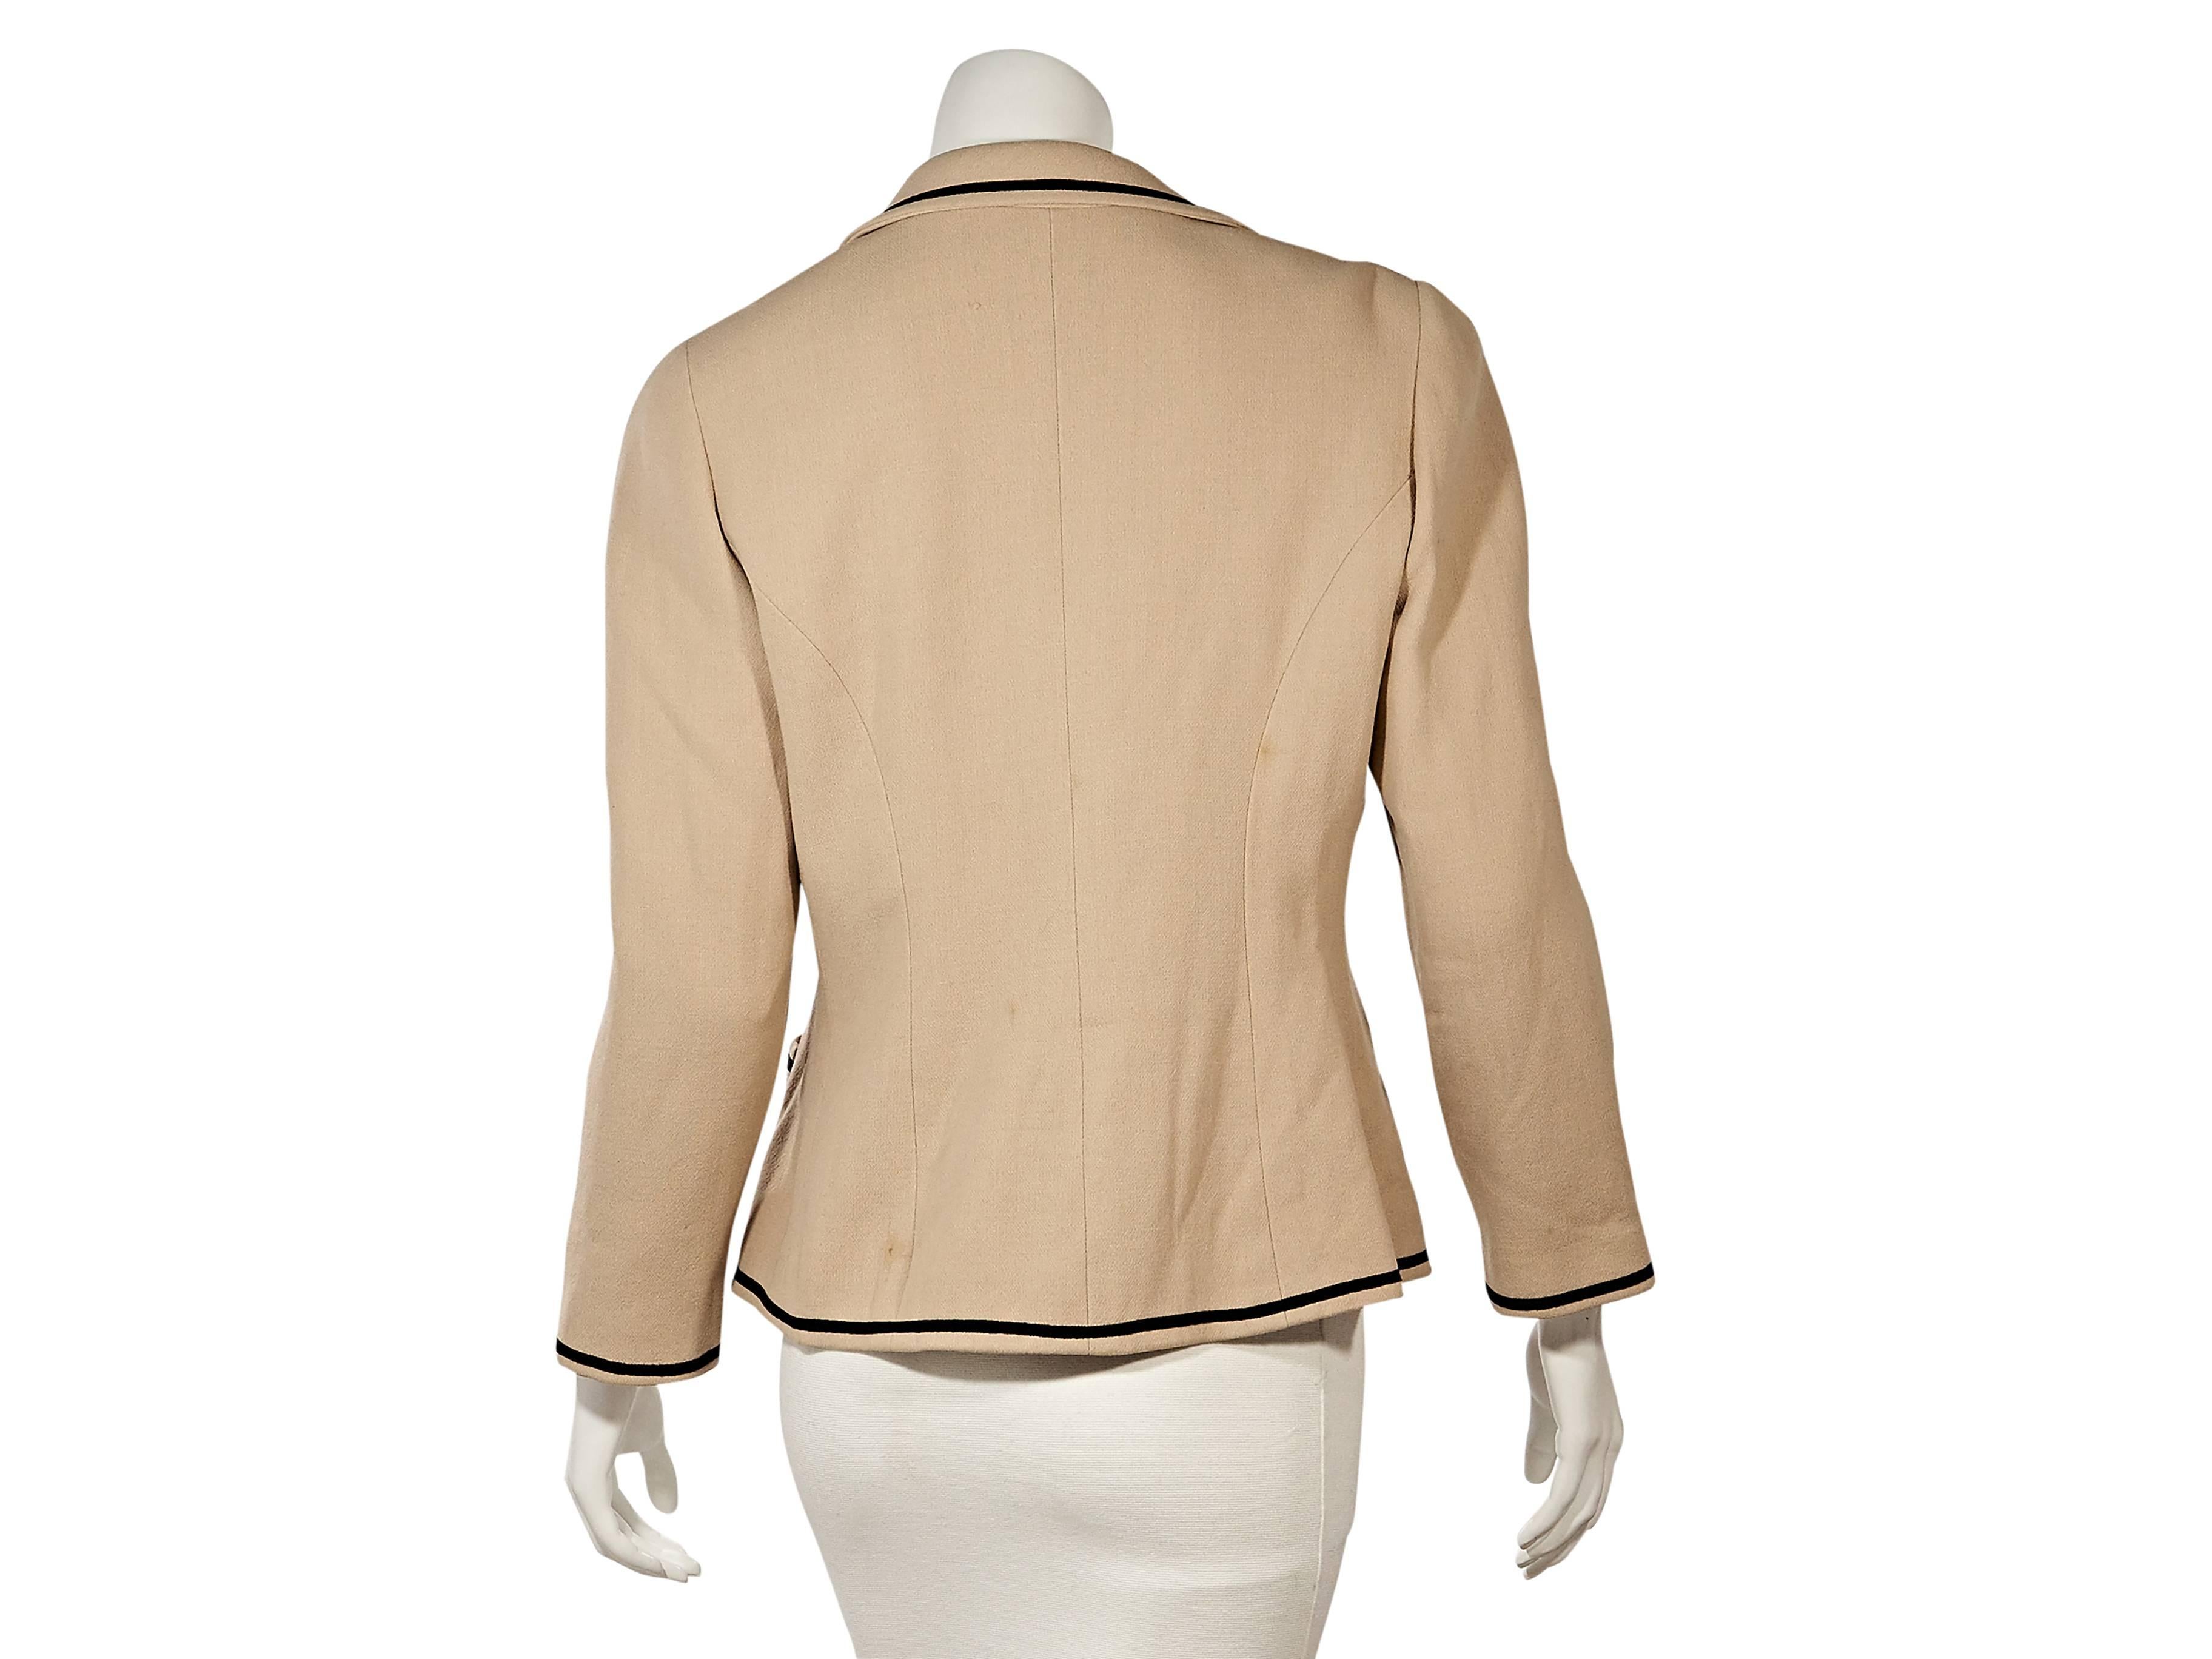 Product details:  Vintage tan blazer by Chanel.  Piped trim.  Rounded notched lapel.  Long sleeves.  Single button-front.  Waist patch pockets.  
Condition: Very good. 